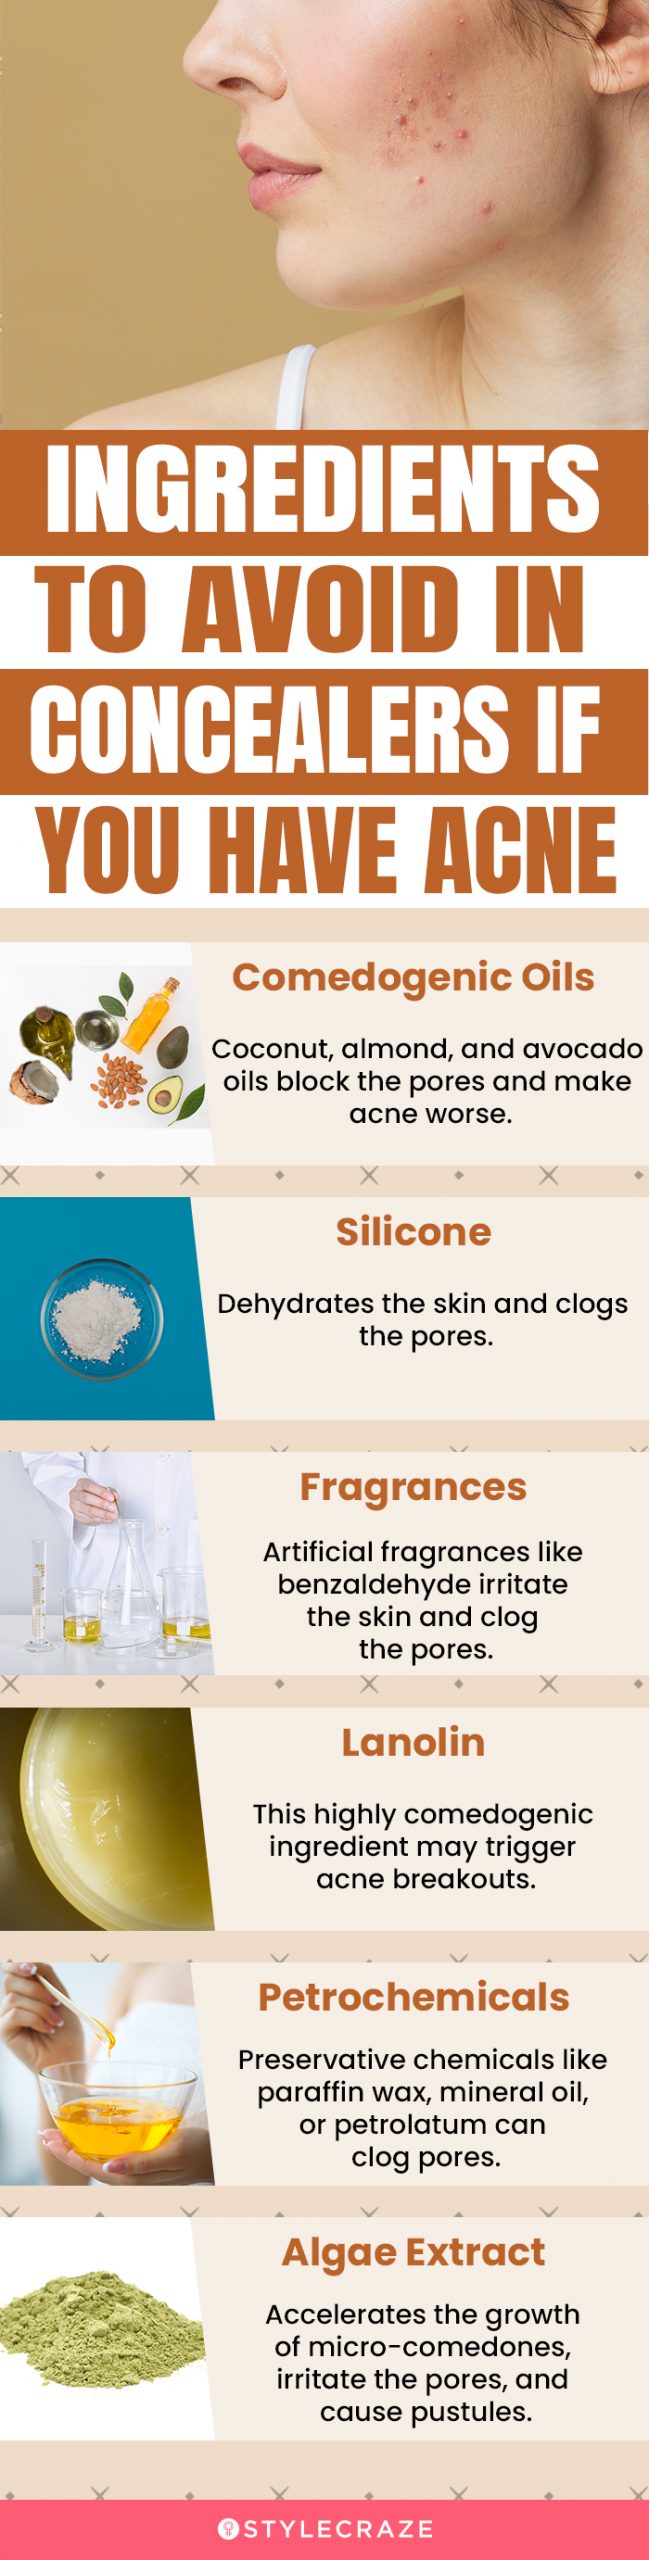 Ingredients To Avoid In Concealers If You Have Acne (infographic)